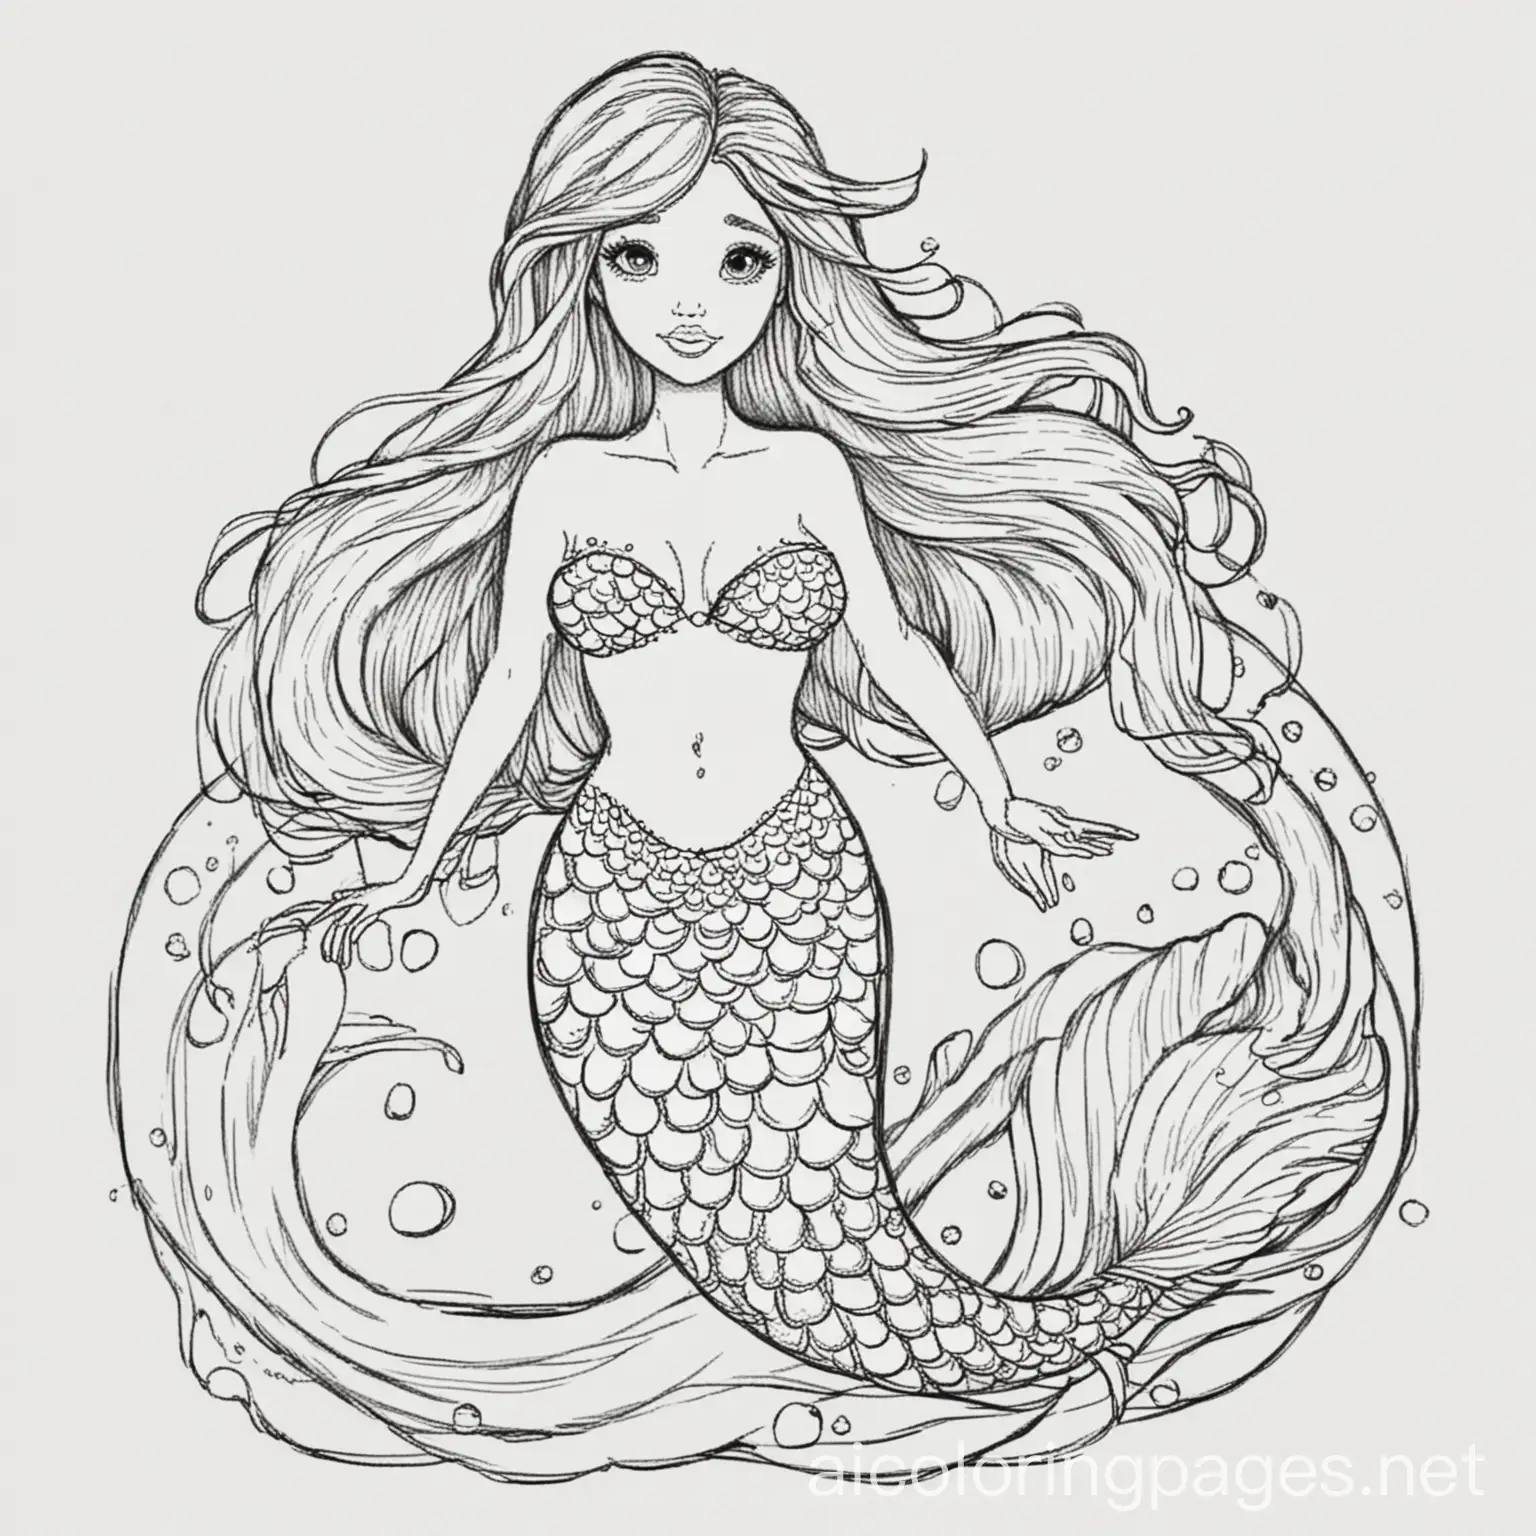 Mermaid, Coloring Page, black and white, line art, white background, Simplicity, Ample White Space. The background of the coloring page is plain white to make it easy for young children to color within the lines. The outlines of all the subjects are easy to distinguish, making it simple for kids to color without too much difficulty